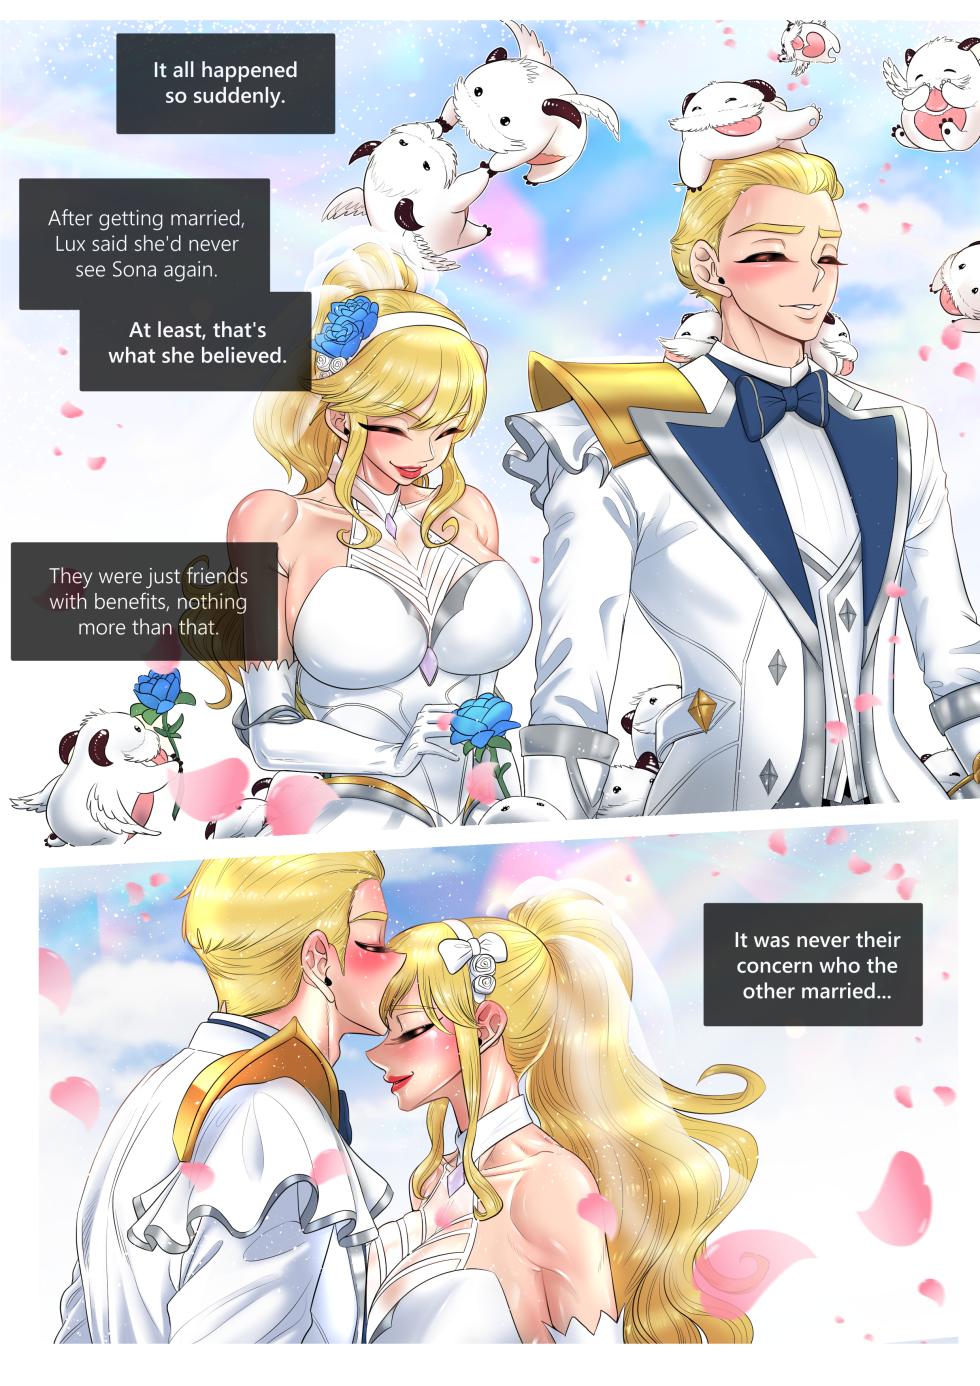 [TaejaHo] "Lsn't That Your Husband's Number?" Lux X Sona (League of Legends) - English (Pixiv Fanbox) - Page 6